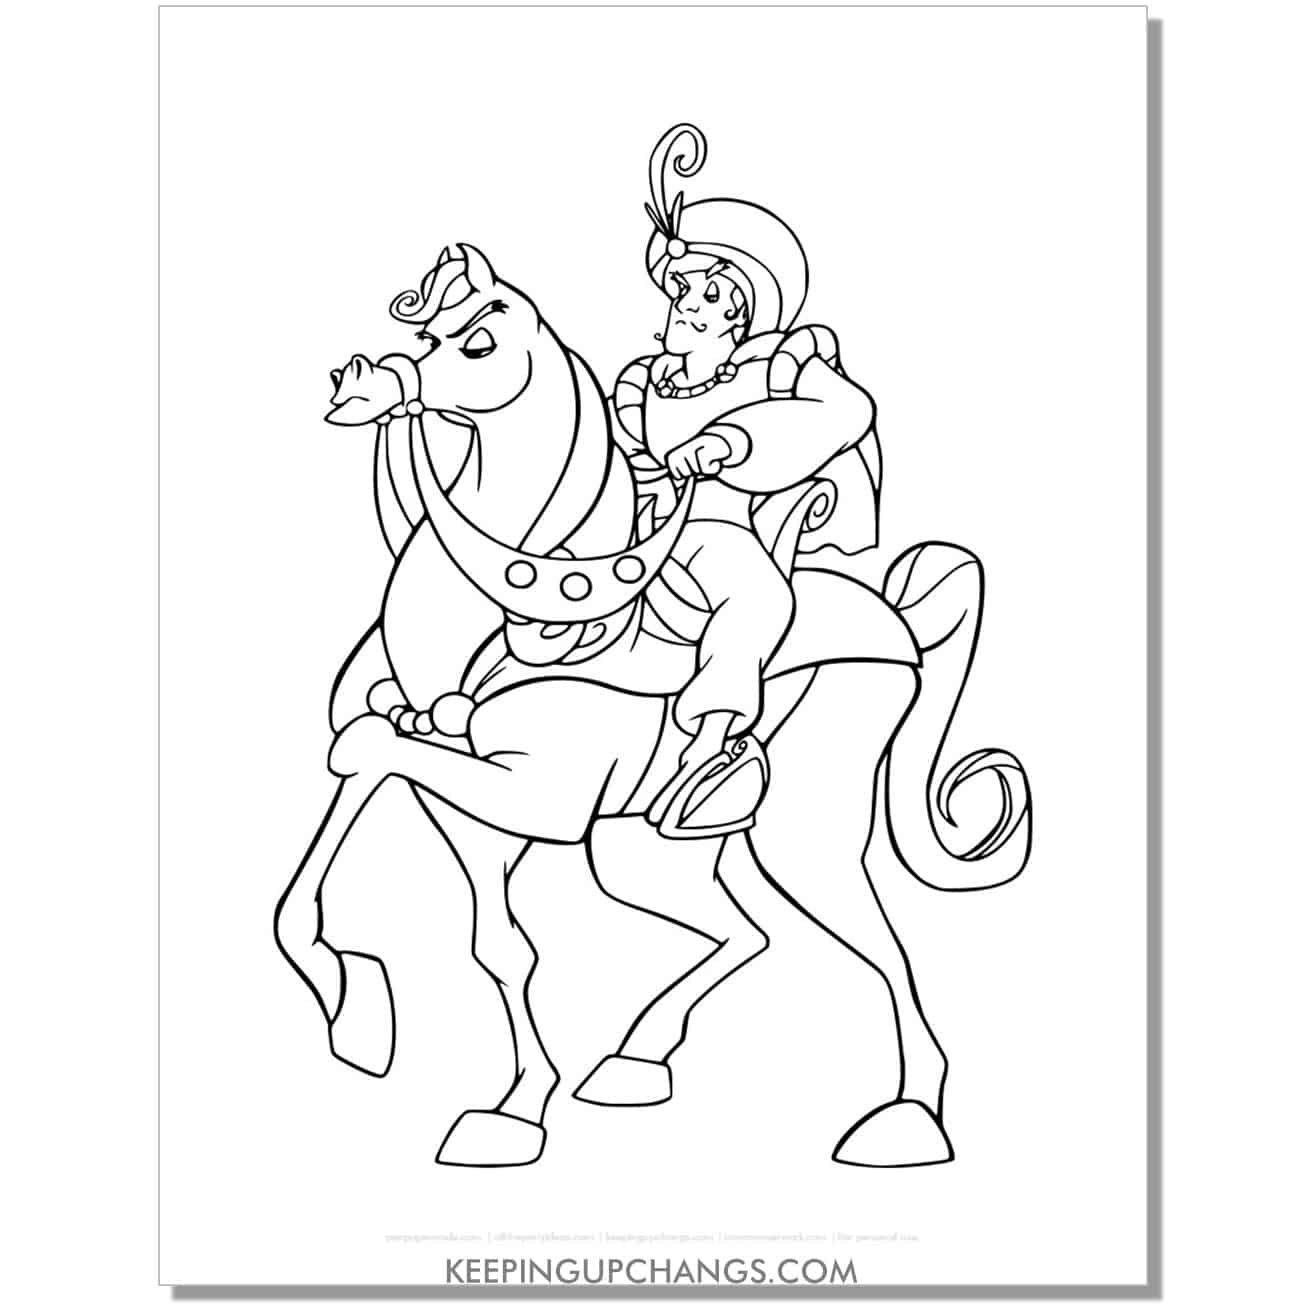 aladdin prince achmed on horse coloring page, sheet.